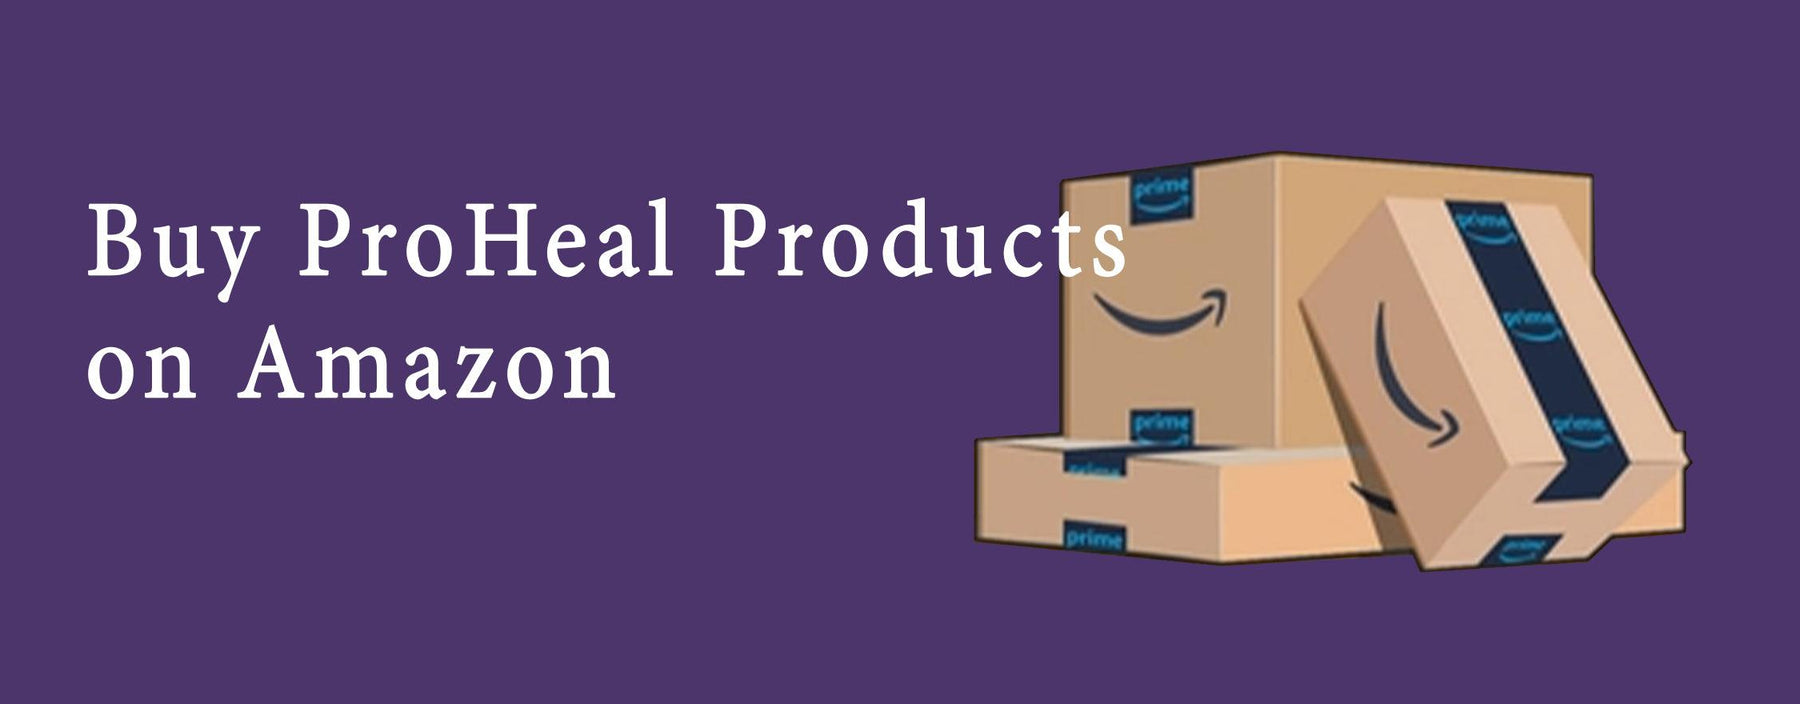 Buy ProHeal Products on Amazon - ProHeal-Products